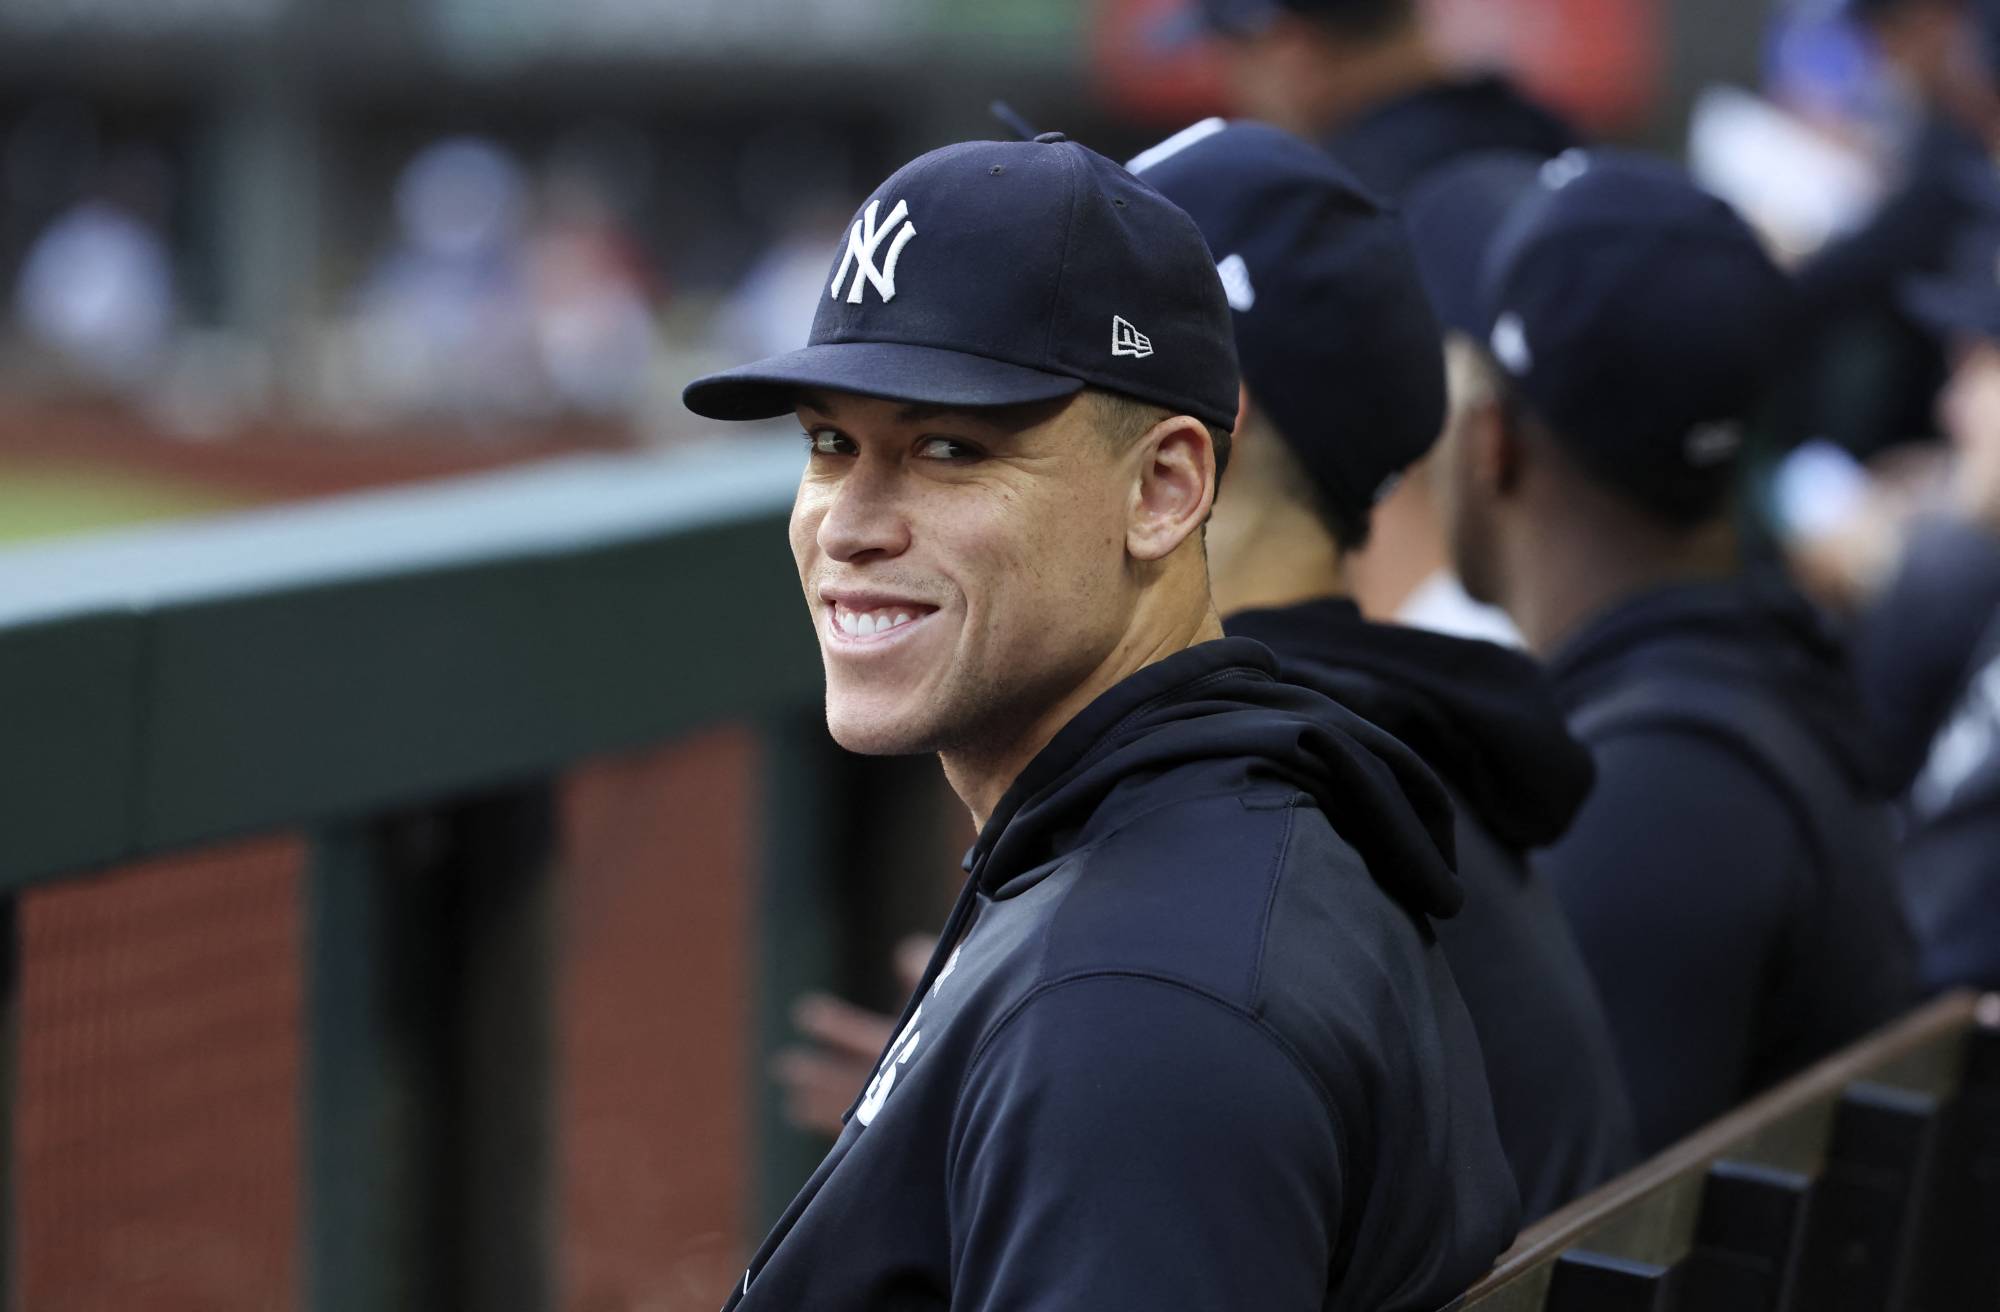 Aaron Judge wins AL MVP after record-setting season with Yankees